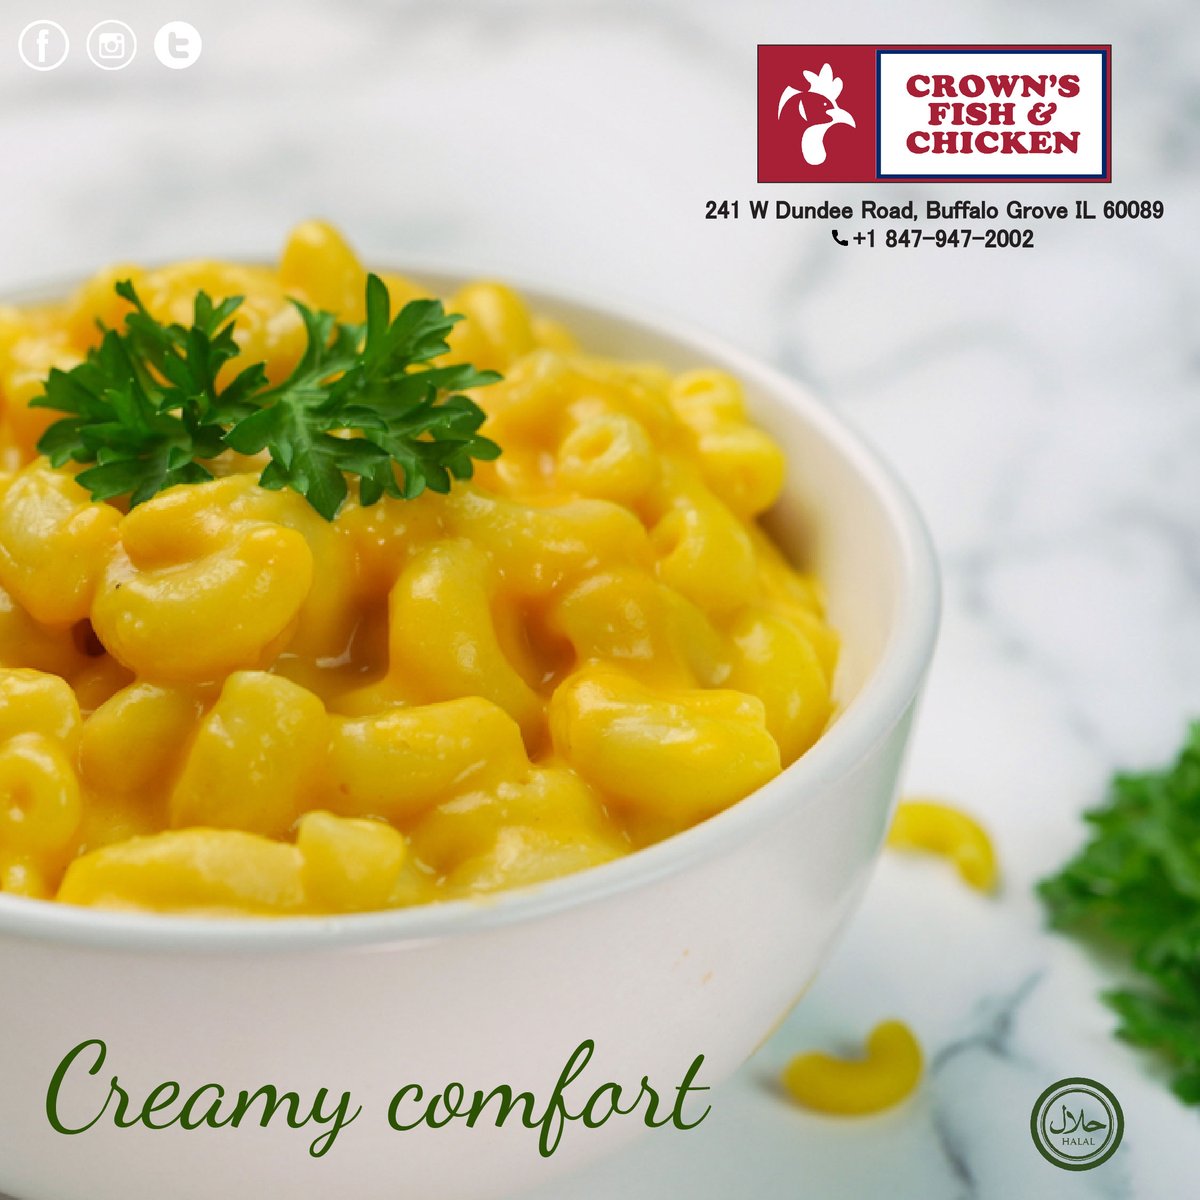 Melting with cheesy goodness
#MacNCheeseLove
#CheesyGoodness
#ComfortFood
#FoodieFaves
#CheeseLovers
#PastaPerfection
#MacNCheeseCravings
#Foodgasm
#IndulgeInCheese
#CreamyDelight
#MacNCheeseAddict
#CheeseObsession
#CheesyCravings
#NoodleLove
#FoodHeaven